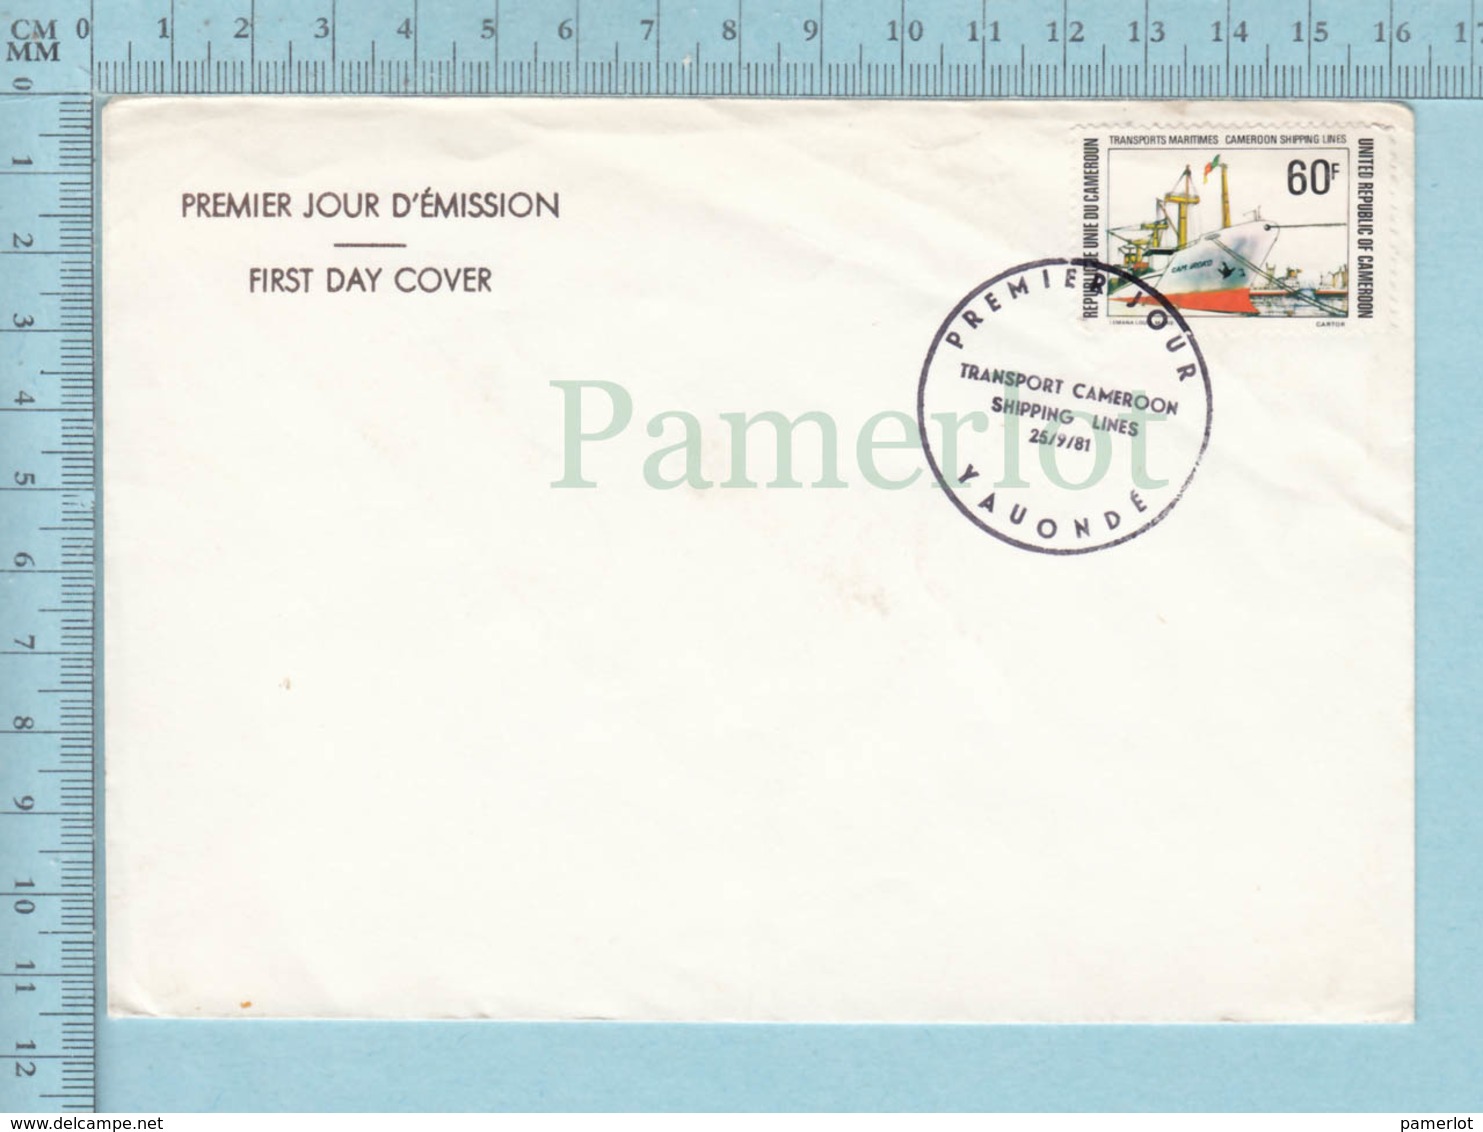 Cameroon - FDC Cover : Premier Jour Transport Cameroon Shipping Lines 25/09/81, Yauondé - Cameroun (1960-...)